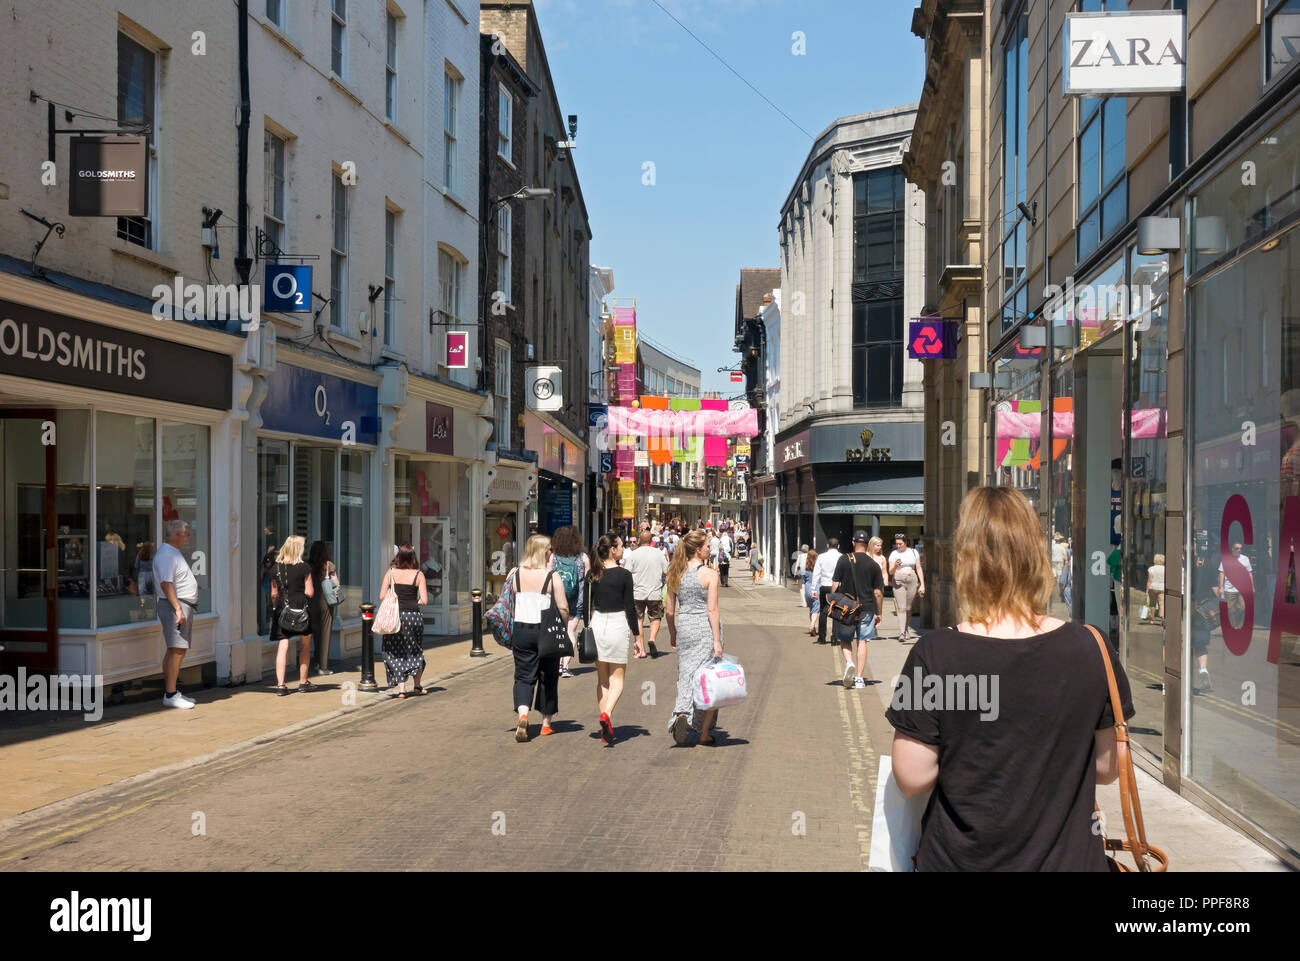 People shopping shoppers in the city town centre shops stores in summer Spurriergate York North Yorkshire England UK United Kingdom GB Great Britain Stock Photo